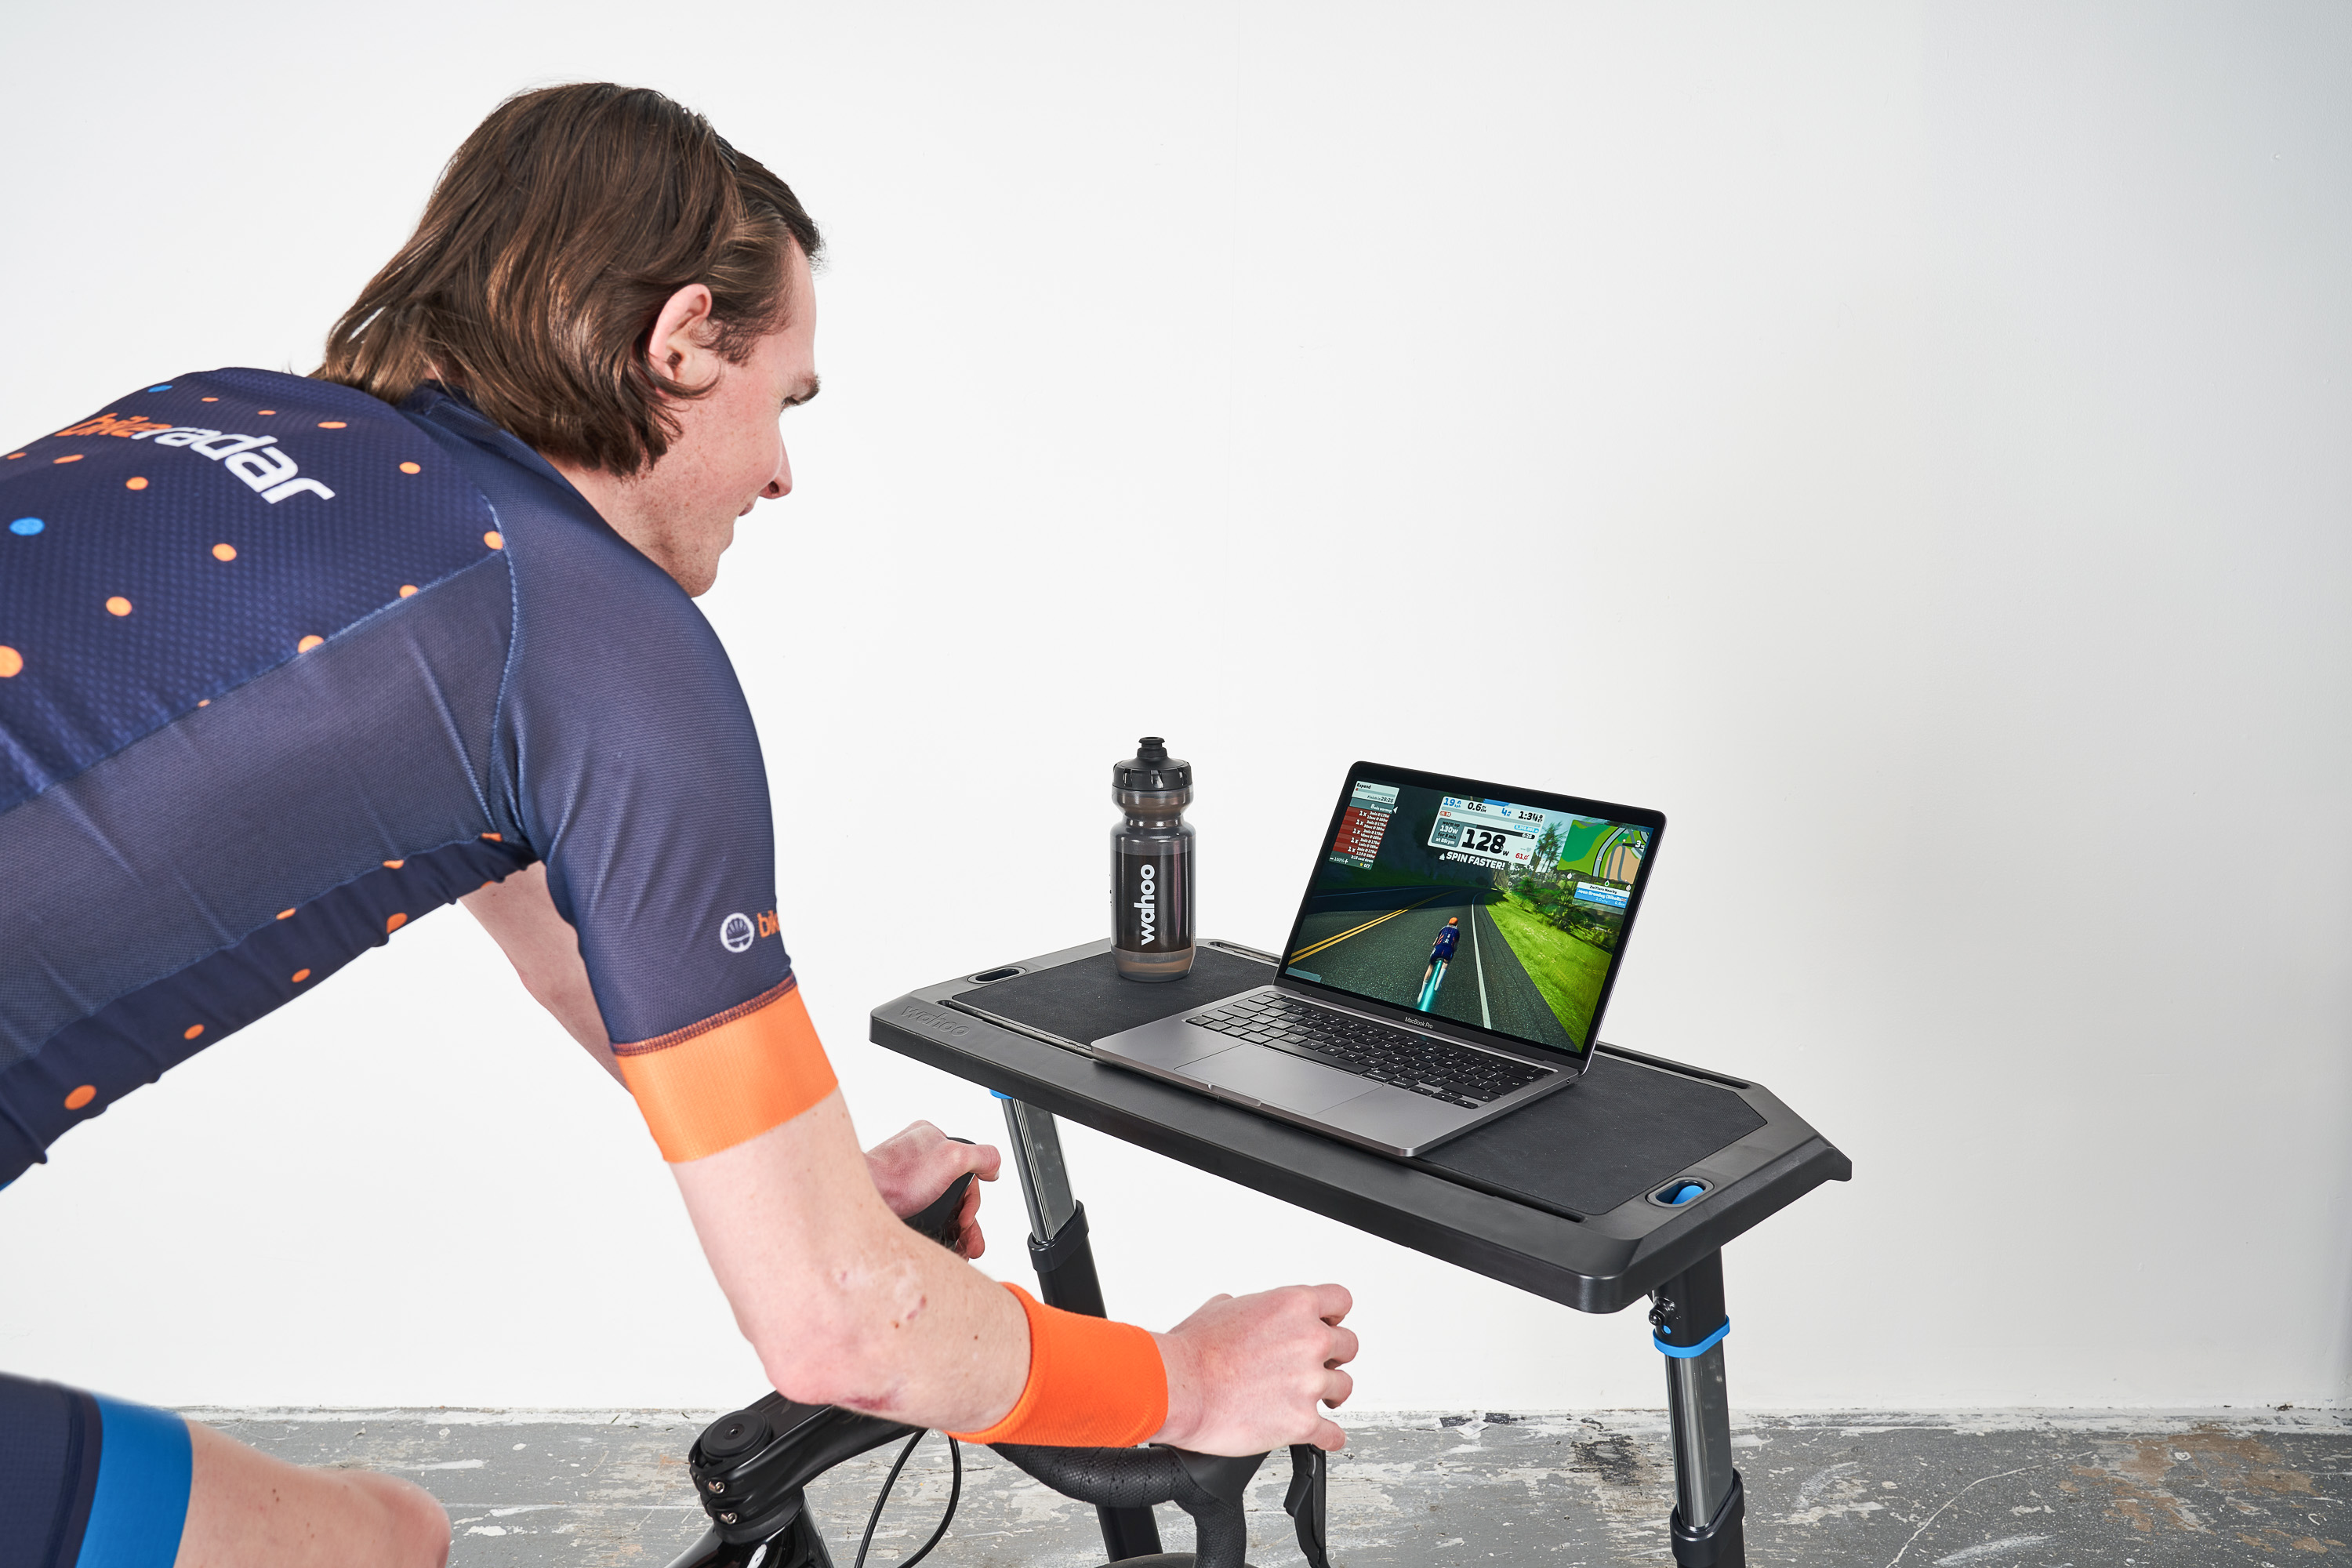 The best indoor cycling apps: which training app should you use?